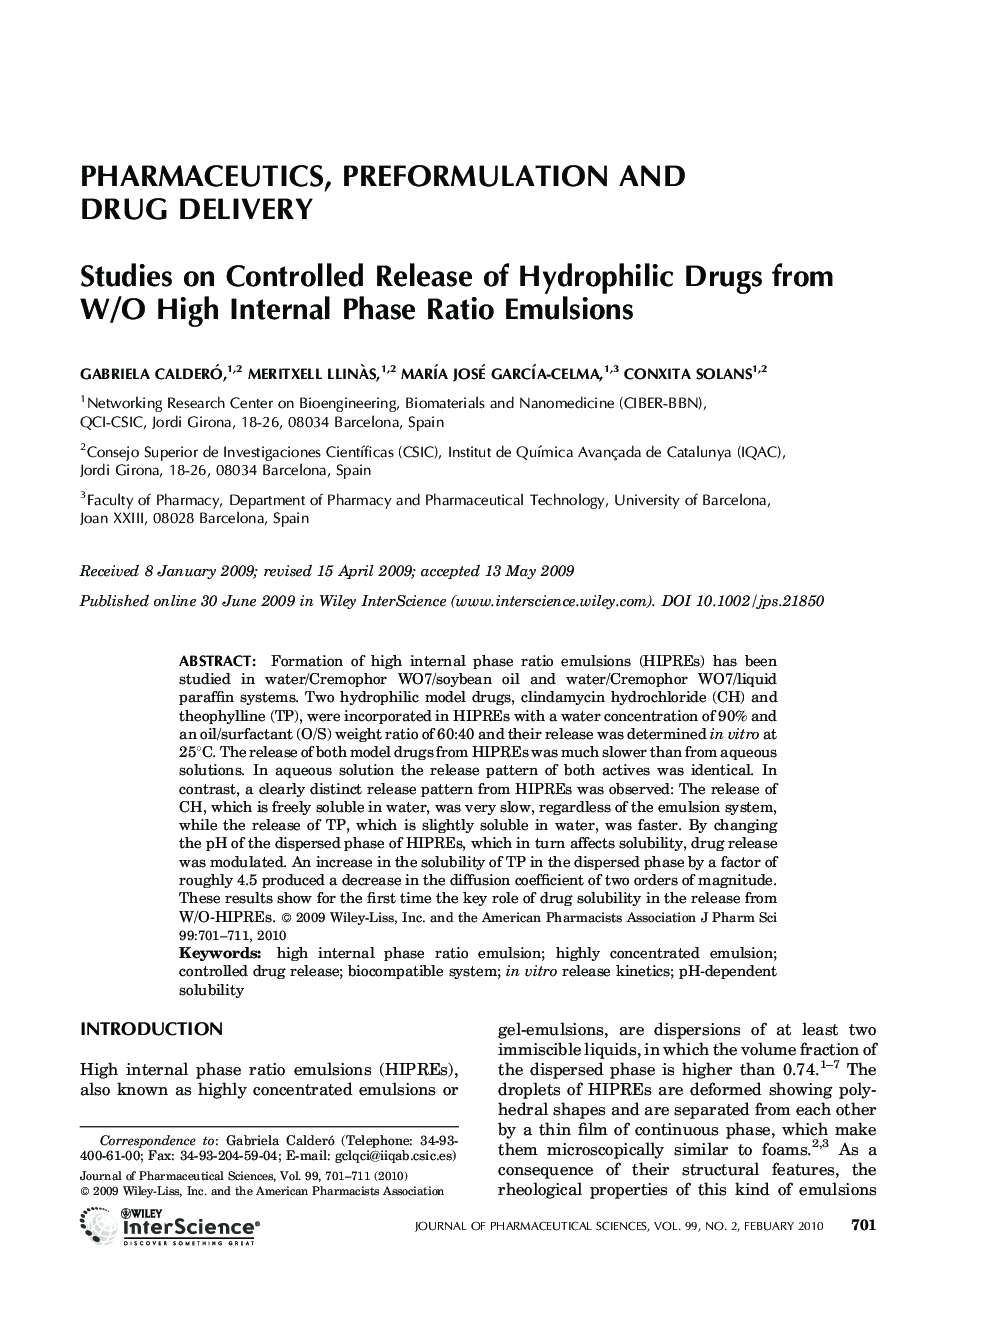 Studies on Controlled Release of Hydrophilic Drugs from W/O High Internal Phase Ratio Emulsions